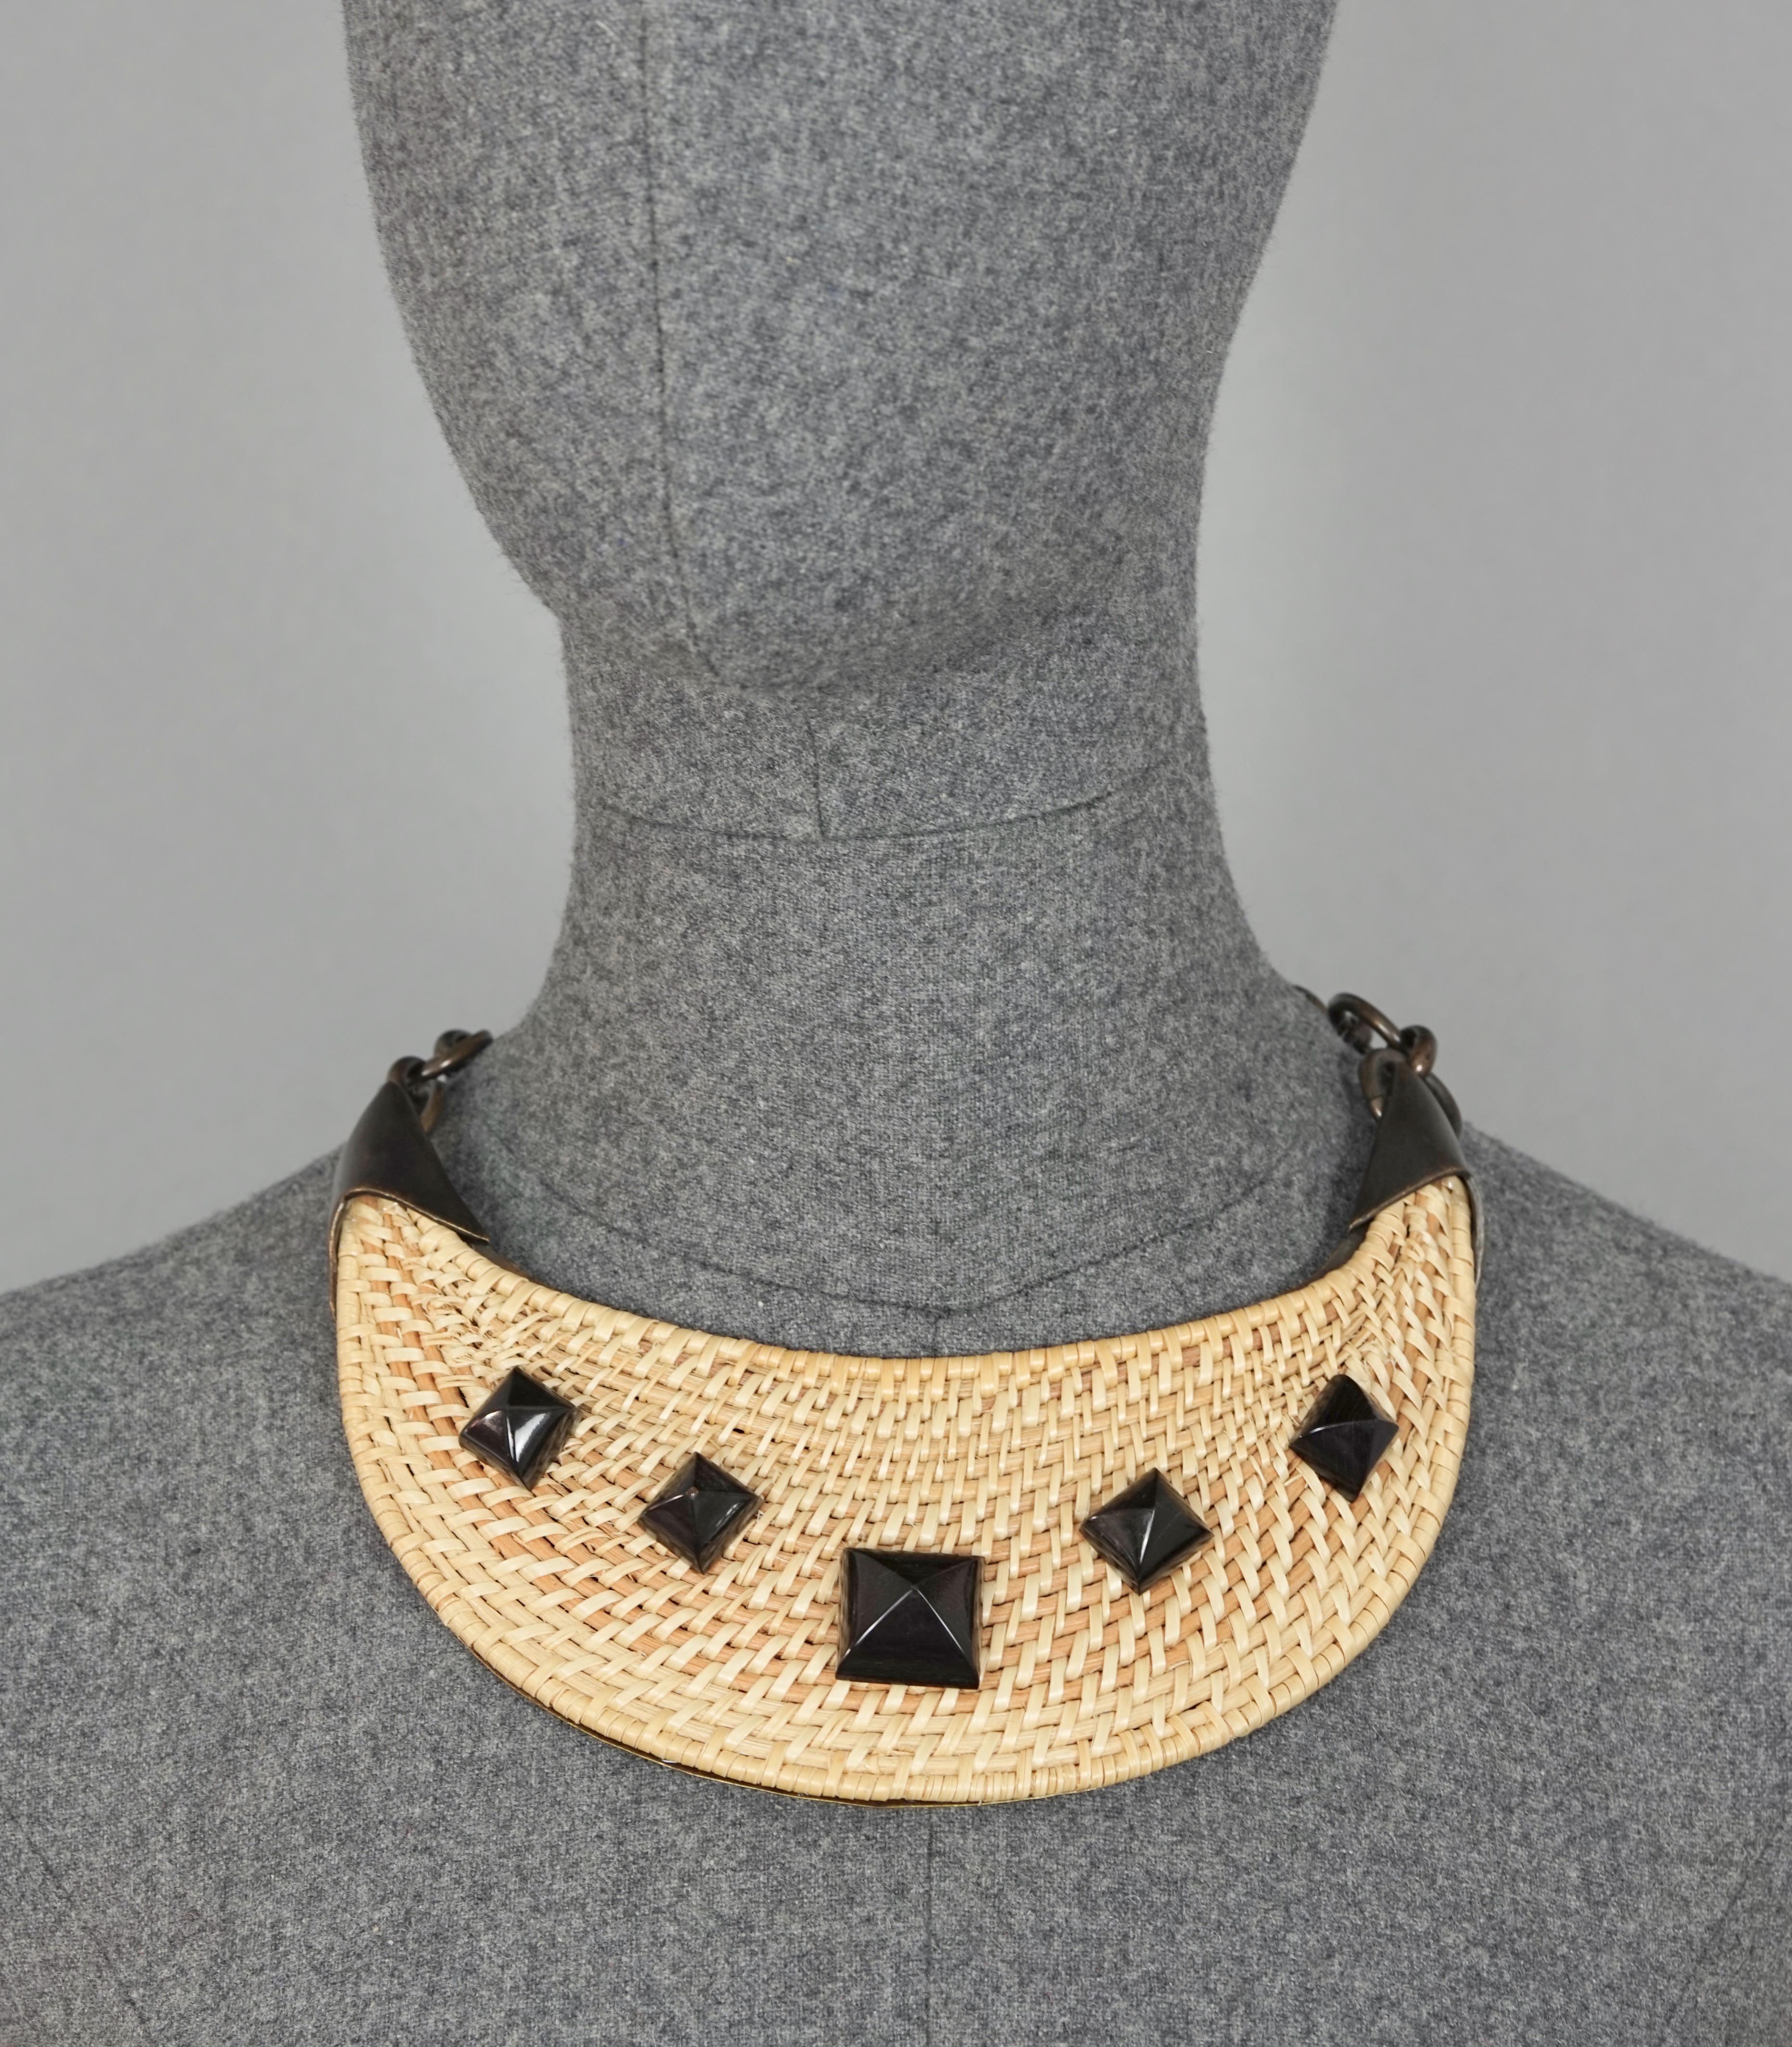 Vintage YVES SAINT LAURENT Ysl by Tom Ford Woven Raffia Bib Necklace

Measurements:
Height: 2.75 inches (7 cm)
Wearable Length: 18.11 inches (46 cm) maximum

Features:
- 100% Authentic YVES SAINT LAURENT by Tom Ford.
- Woven Raffia in natural colour